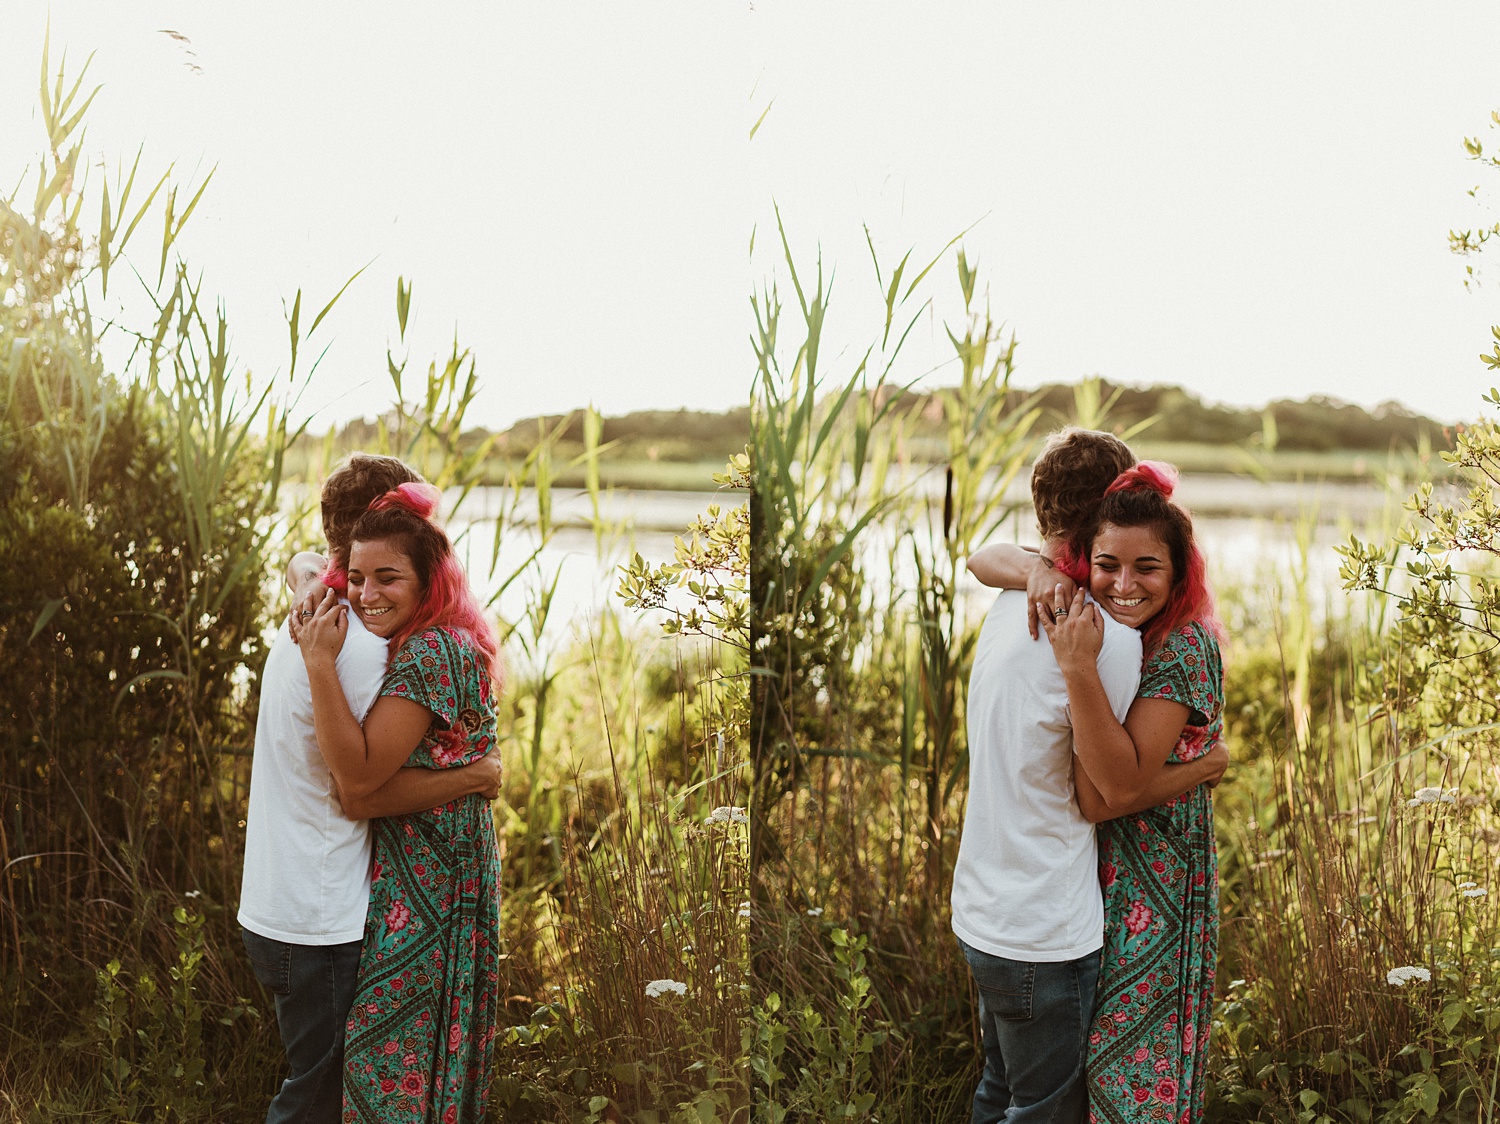 capemay-engagementsession_0019.jpg